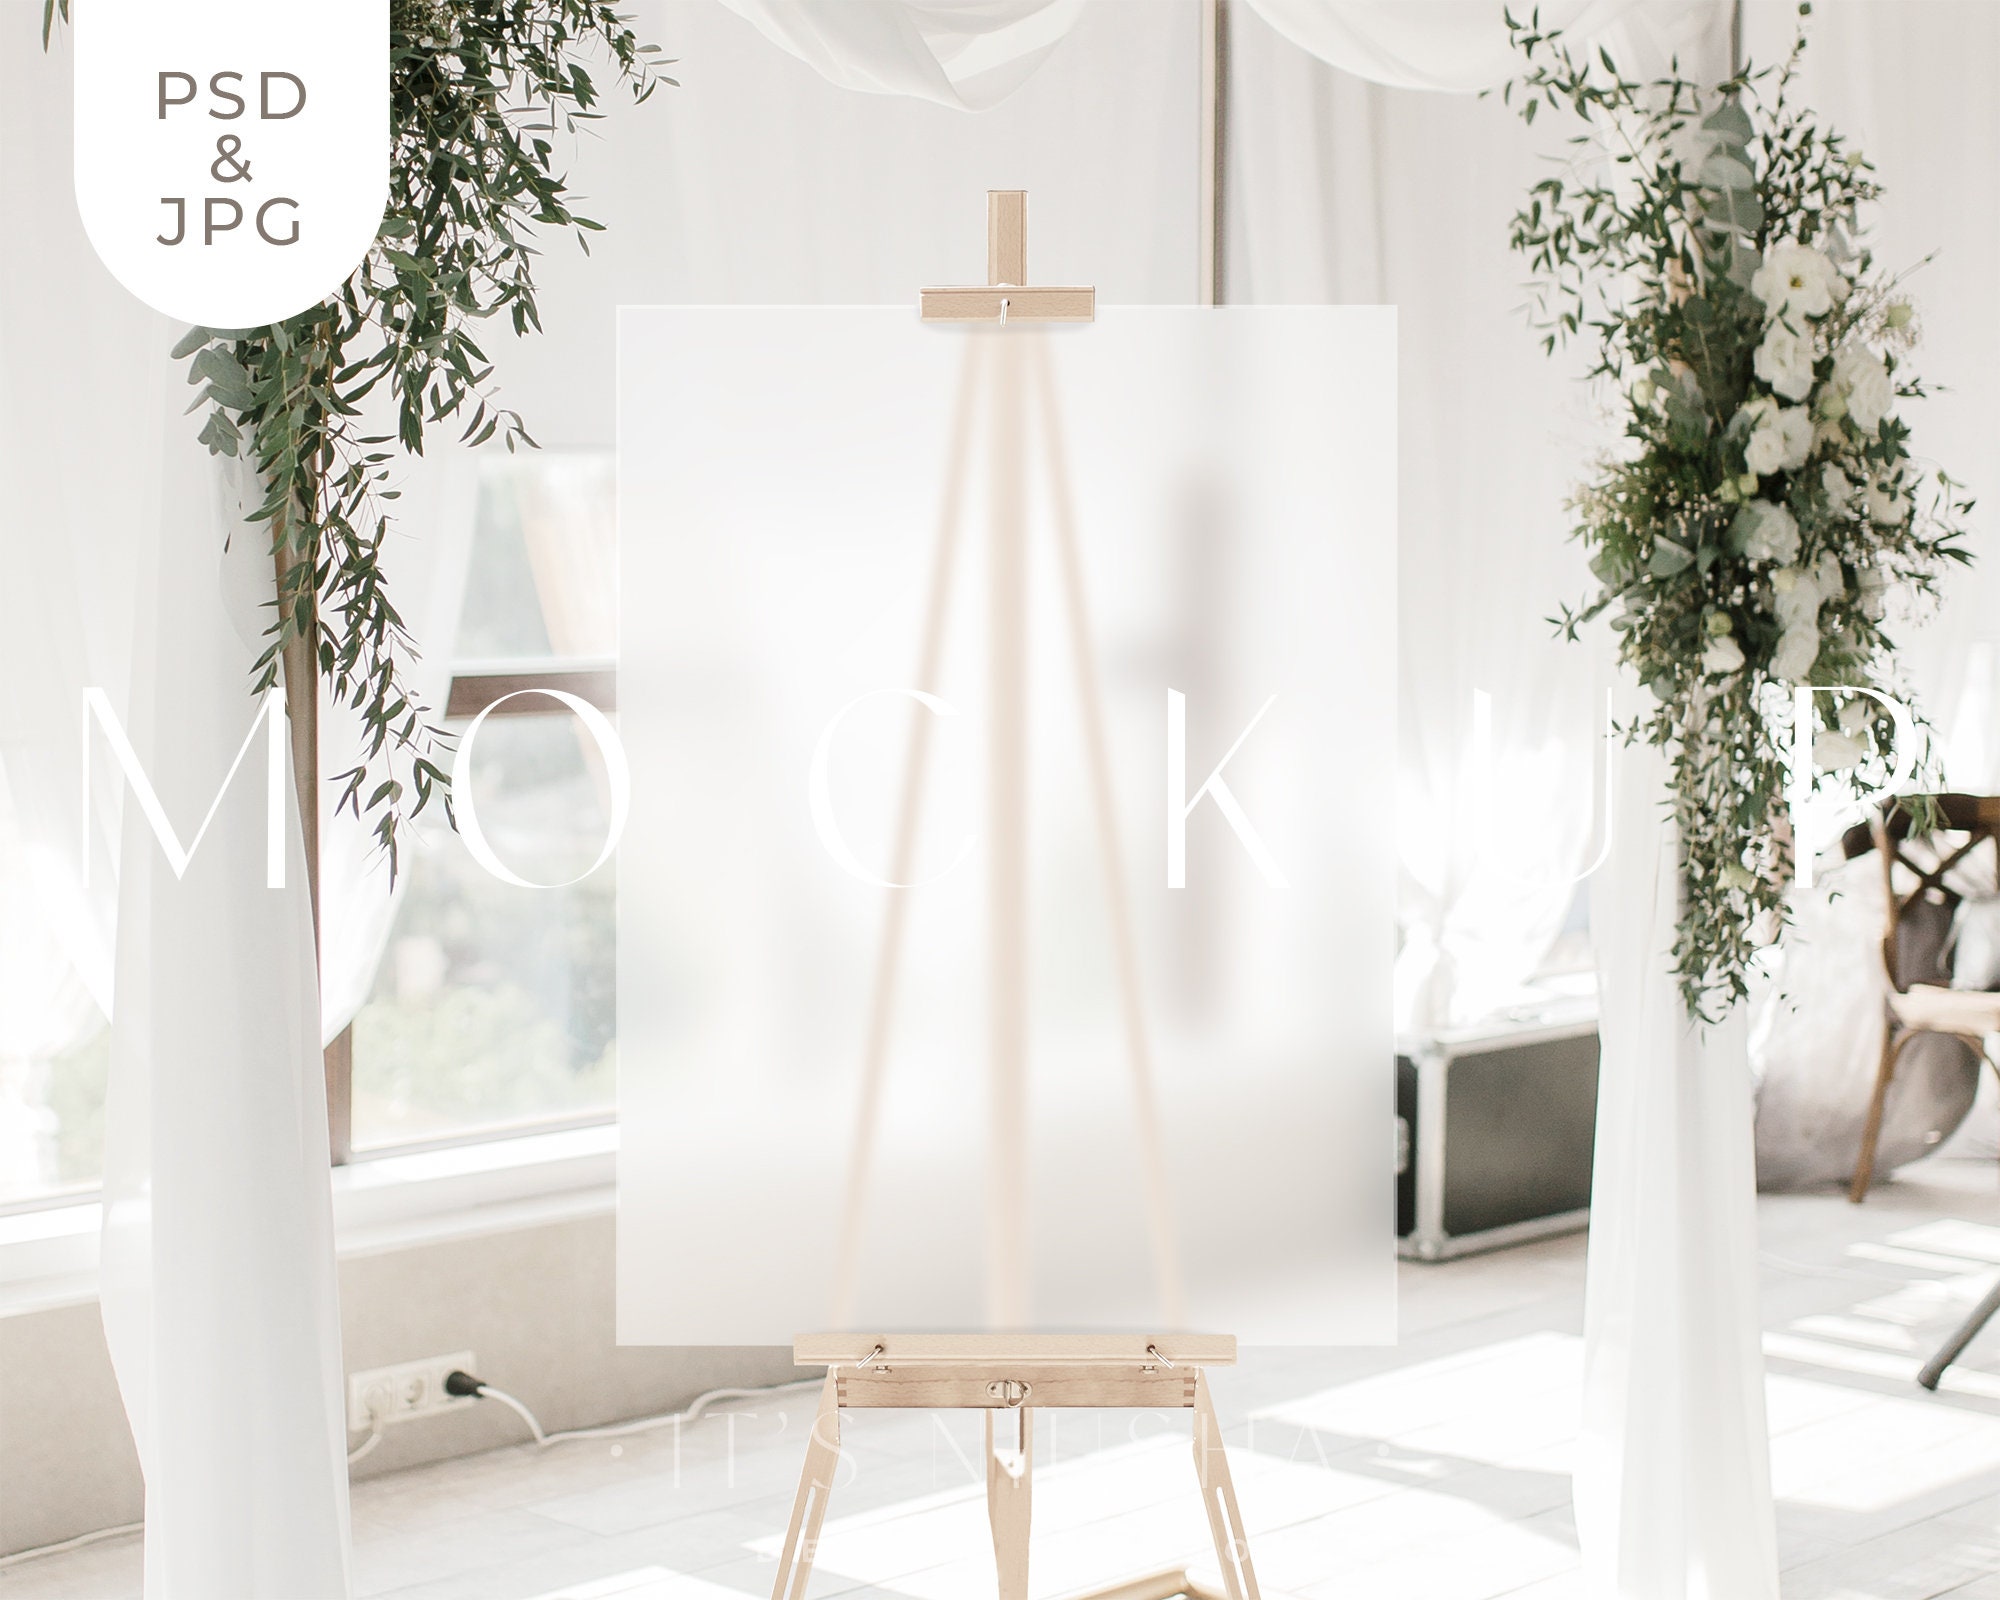 Rose Gold Easel for Wedding Sign, Lightweight Easel Picture Stand